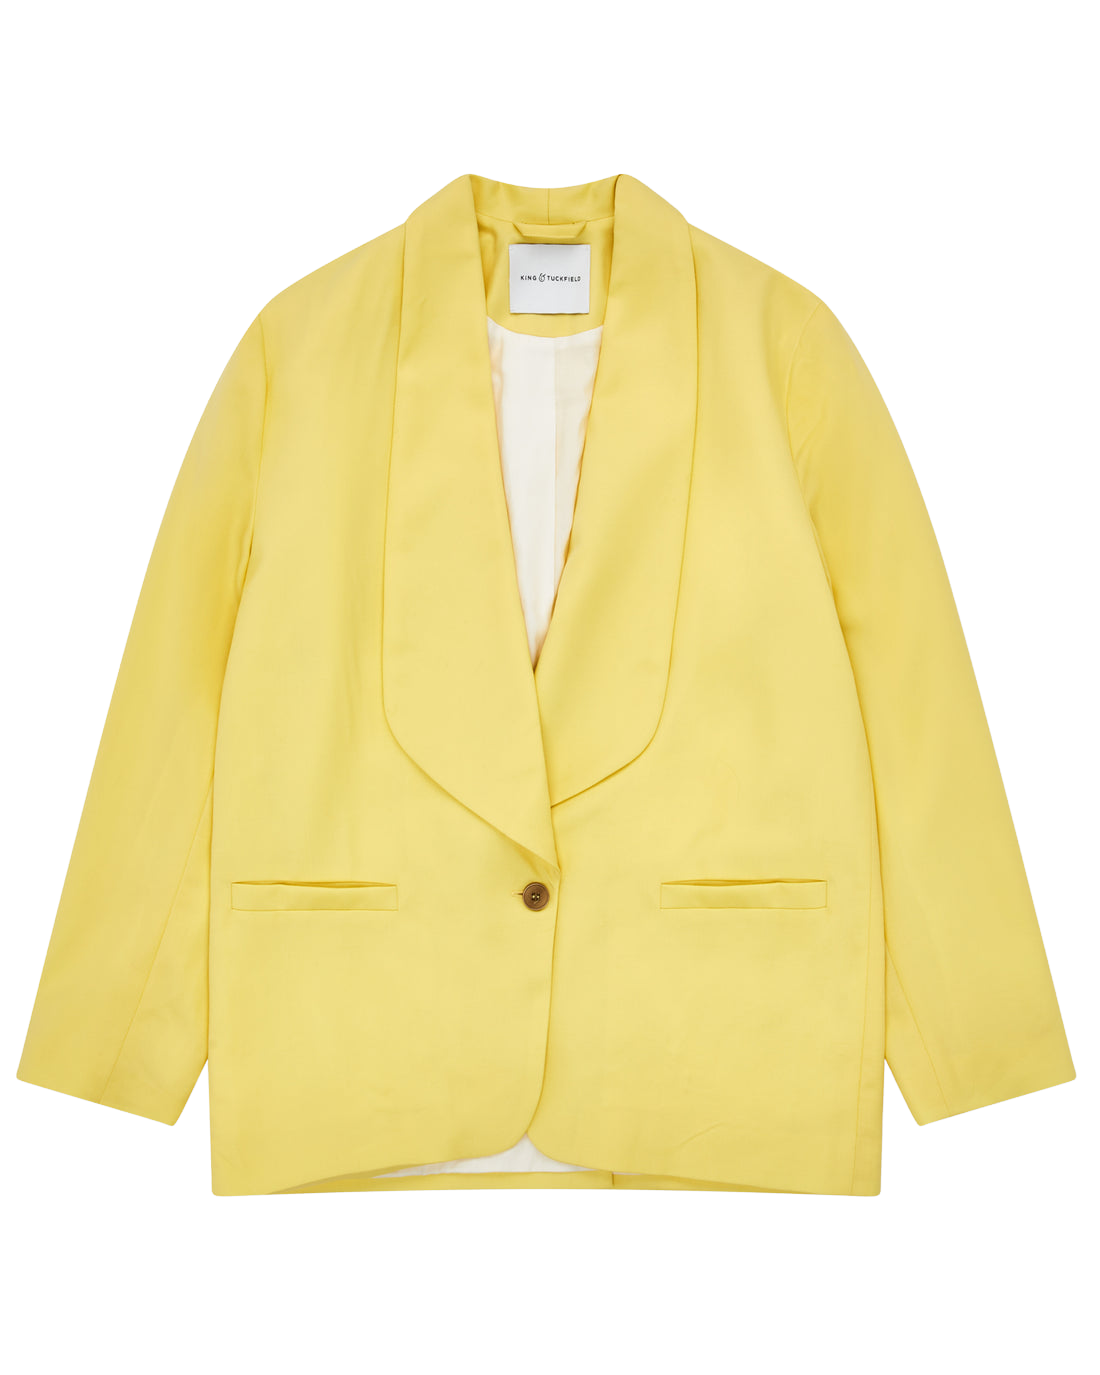 https://storage.googleapis.com/download/storage/v1/b/whering.appspot.com/o/marketplace_product_images%2Fking-tuckfield-curved-lapel-blazer-yellow-qn1tY4TZYNWTsoLYC1BSXD.png?generation=1681220384407888&alt=media